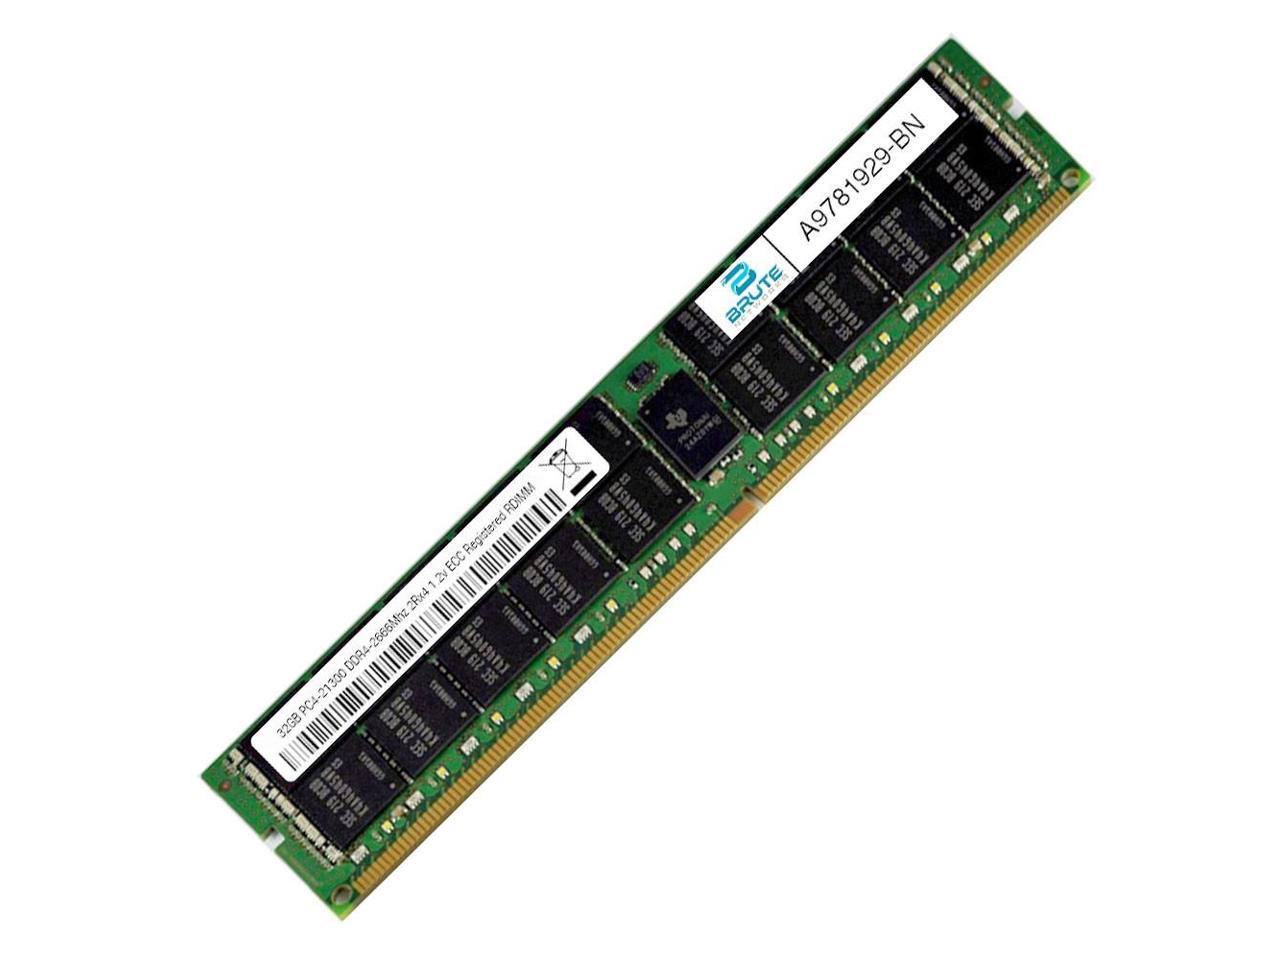 CMS 32GB (4X8GB) DDR4 21300 2666MHZ ECC Registered DIMM Memory Ram Upgrade  Compatible with Dell(R) PowerEdge XR2 ECC Register D58 送料無料 メモリー